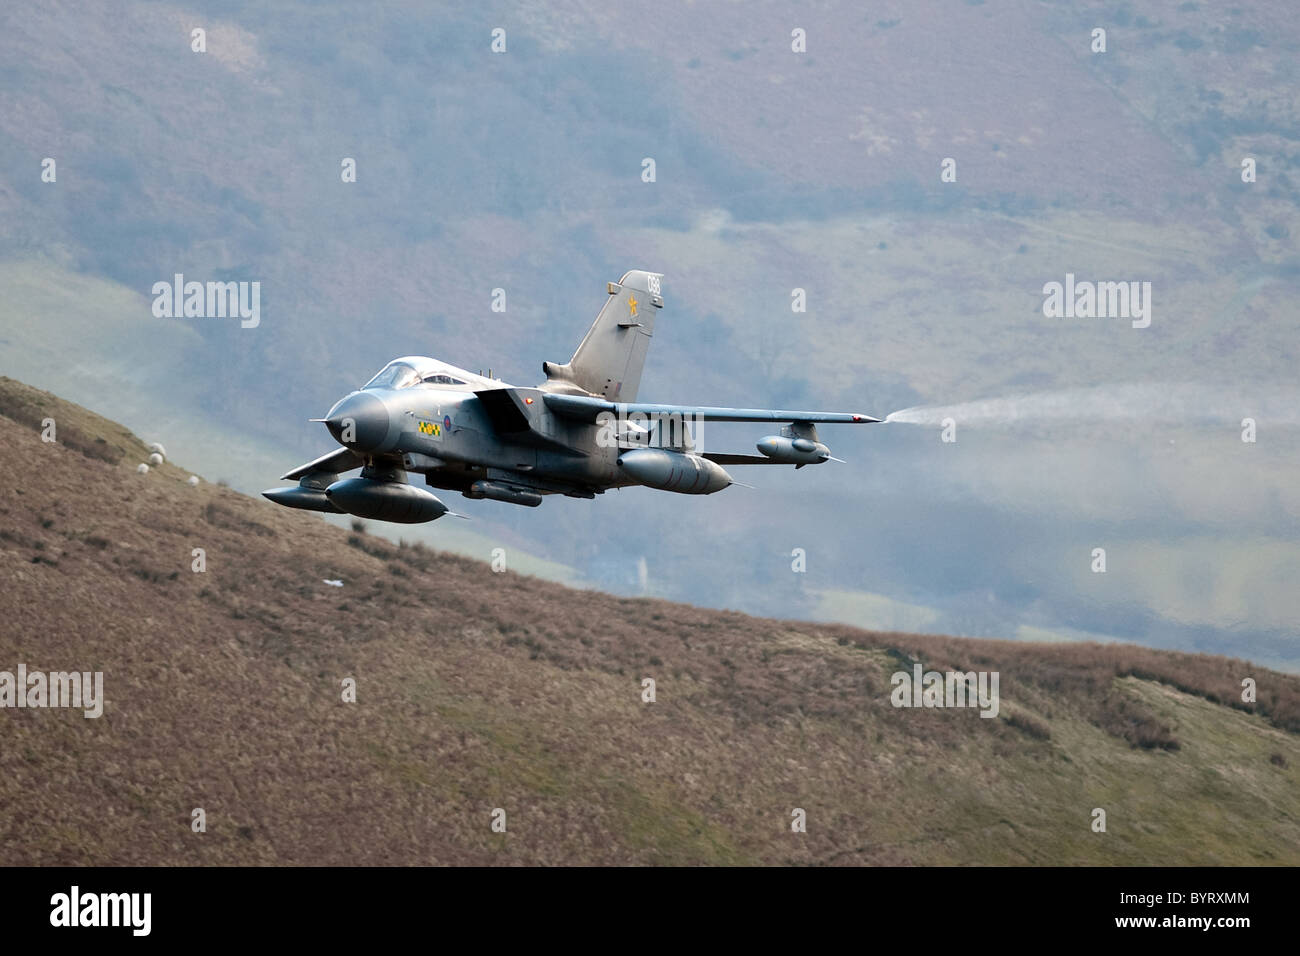 Lowe flying in north wales the mach loop they go as low as 250ft Stock Photo